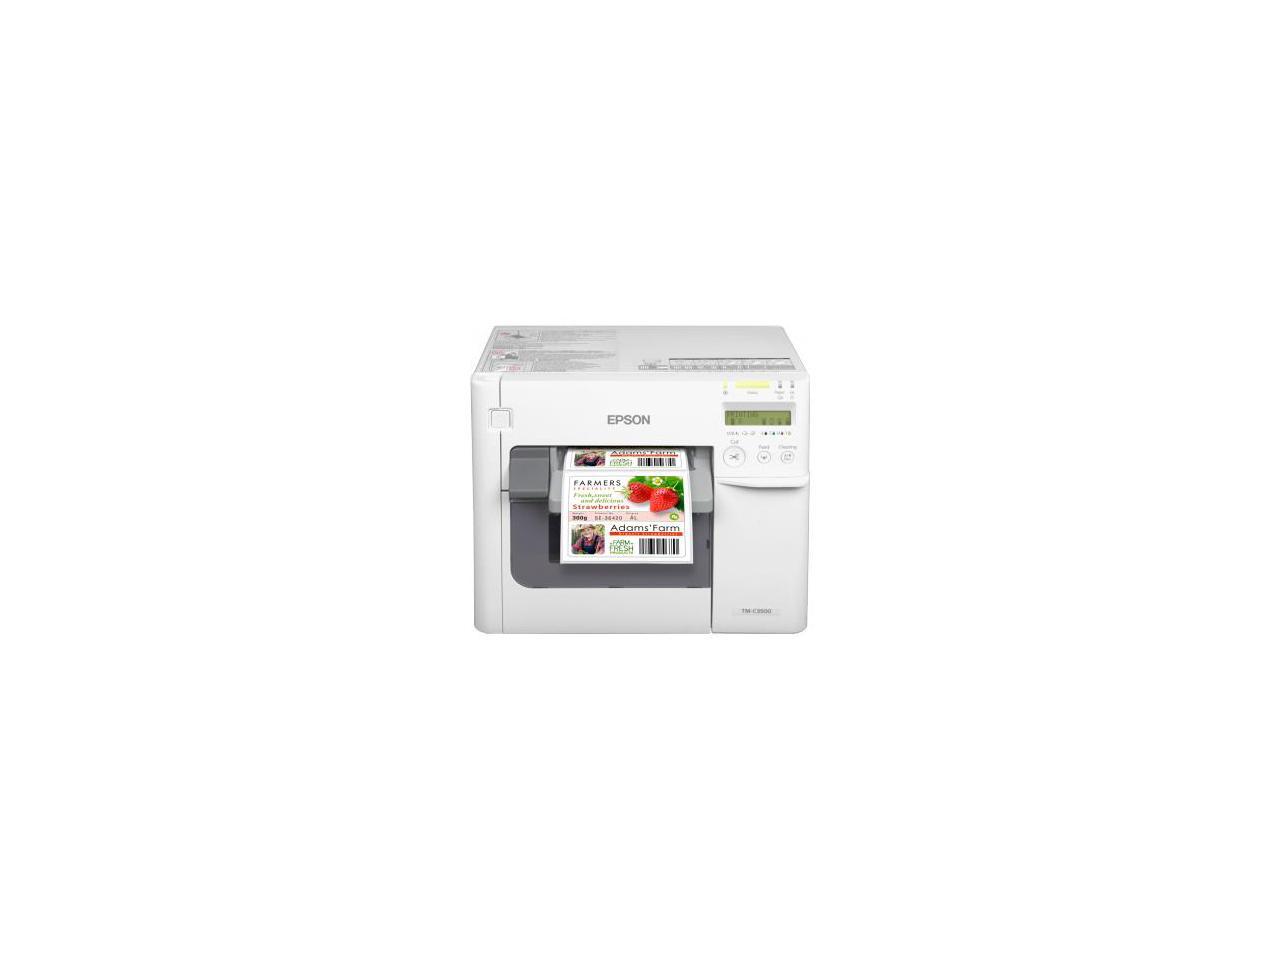 EPSON C31CD54011 DISCONTINUED REFER TO C31CD54A9991 TM-C3500 COLORWORKS INKJET PRINTER ETHERNET and USB POWER SUPPLY INCLUDED CABLE NOT INCLUDED NOT DHCP ENABLED